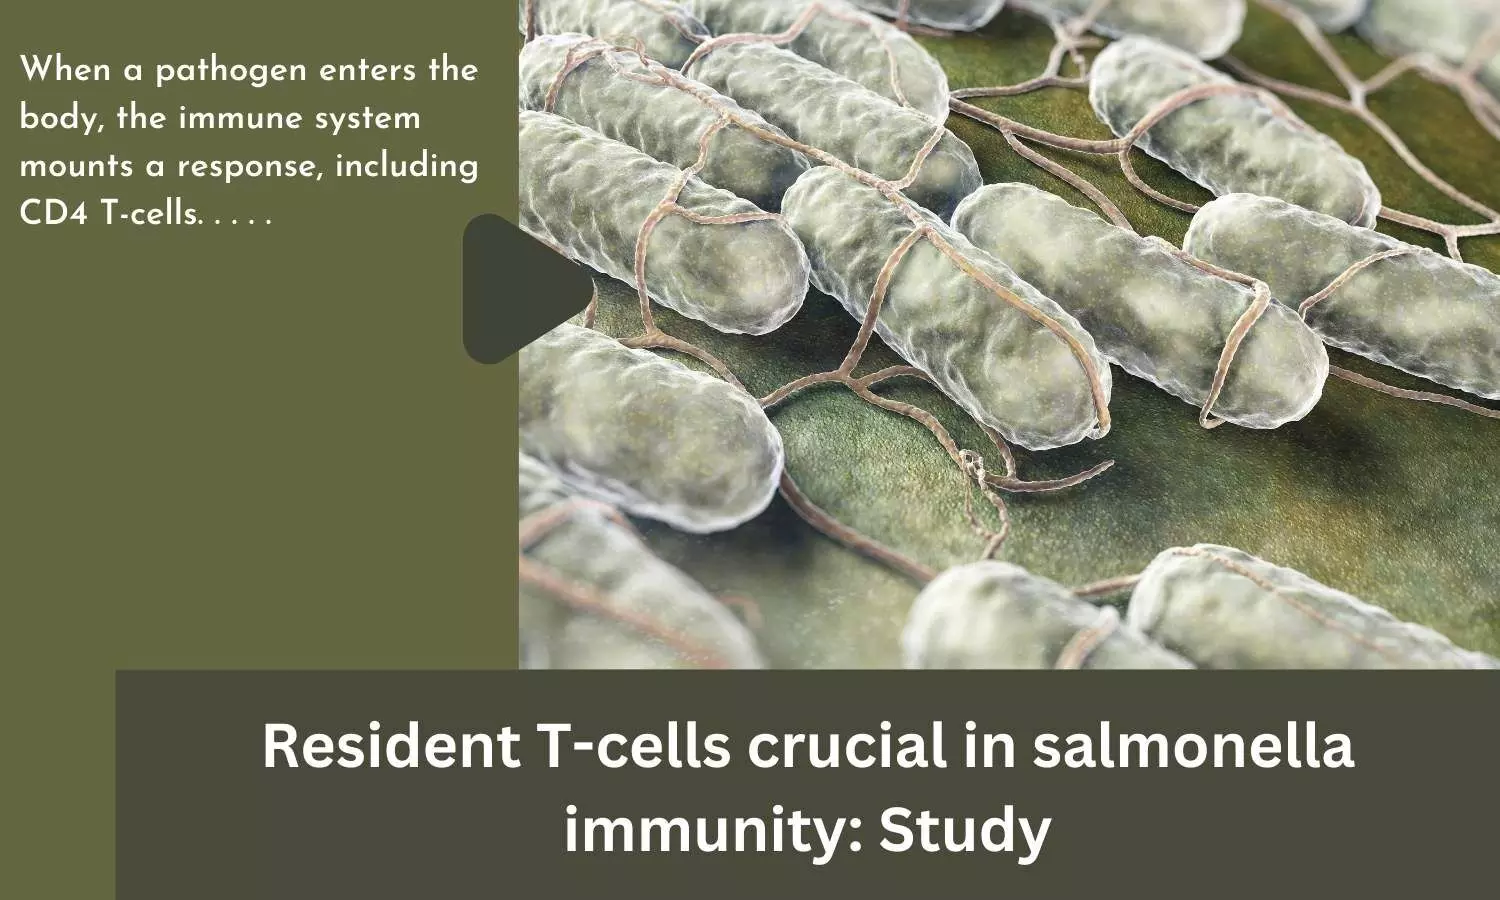 Resident T-cells crucial in salmonella immunity: Study